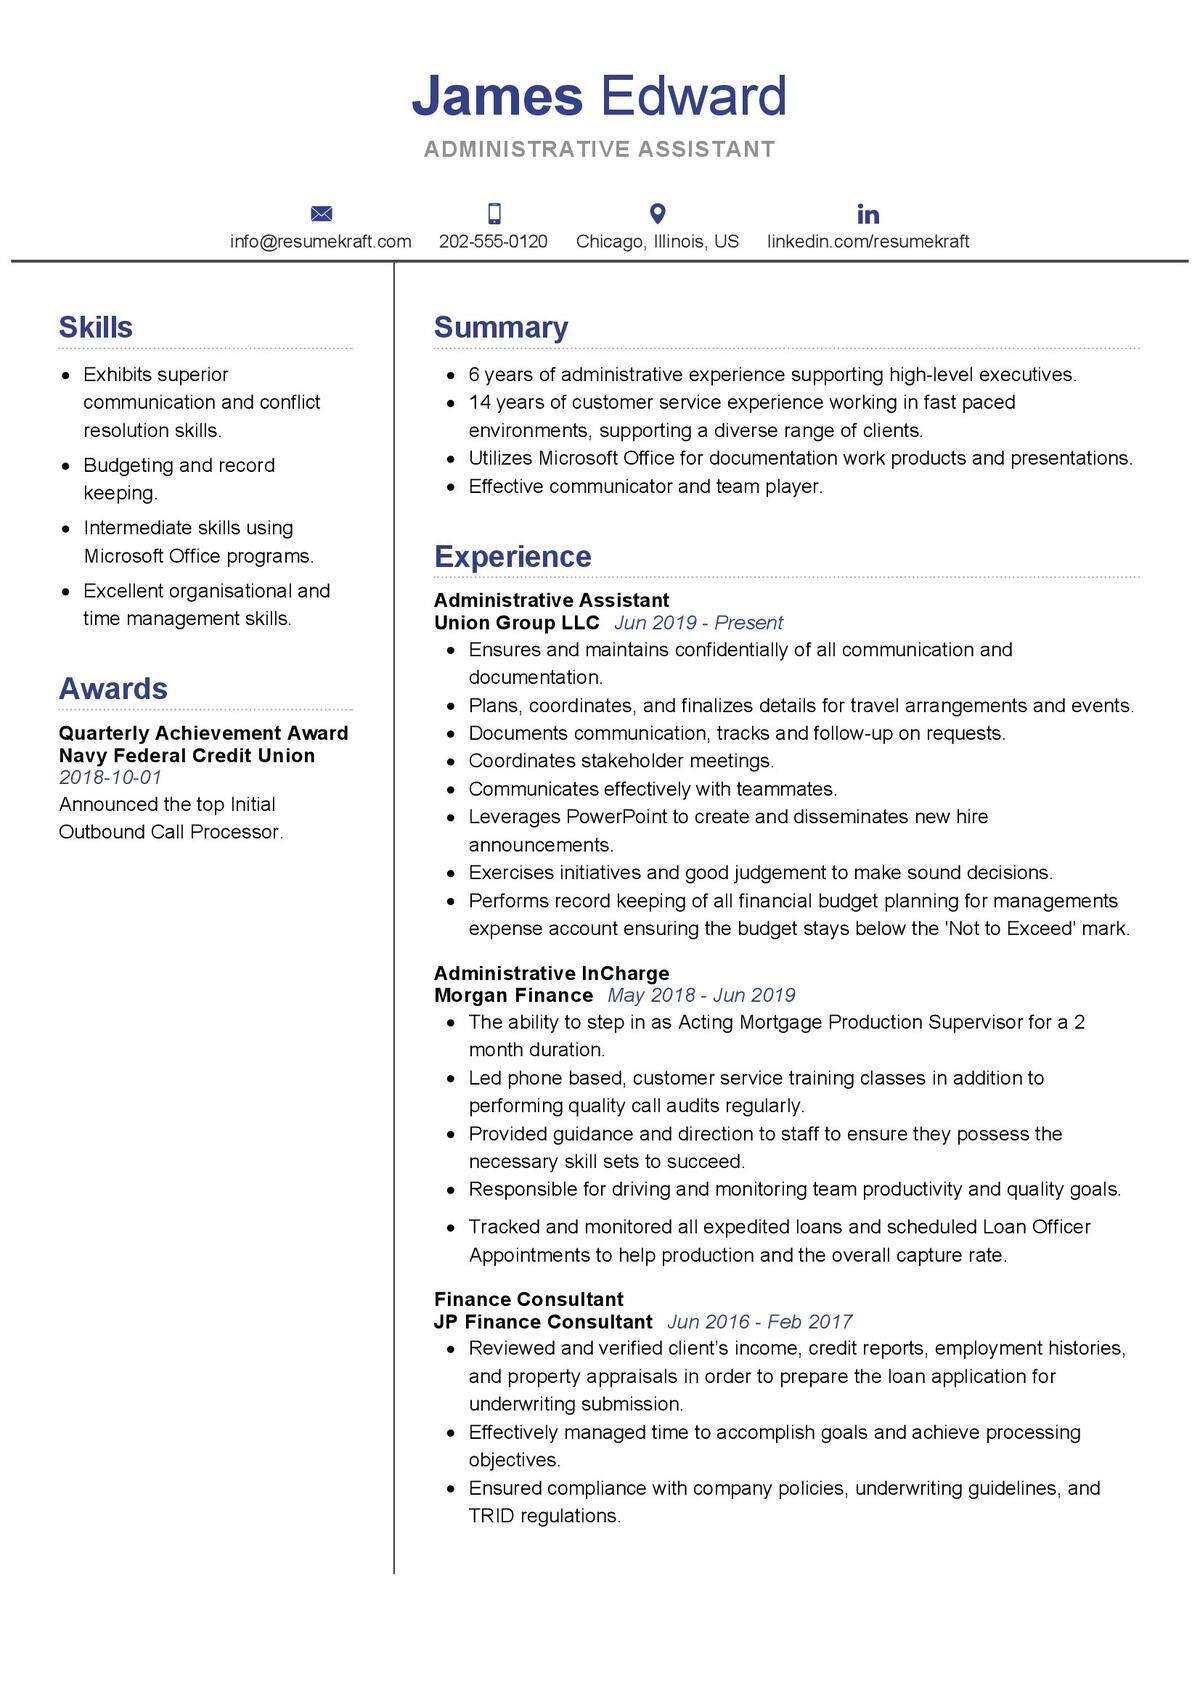 Sample Resume for Administrative assistant and Customer Service Administrative assistant Resume Sample 2021 Writing Guide …